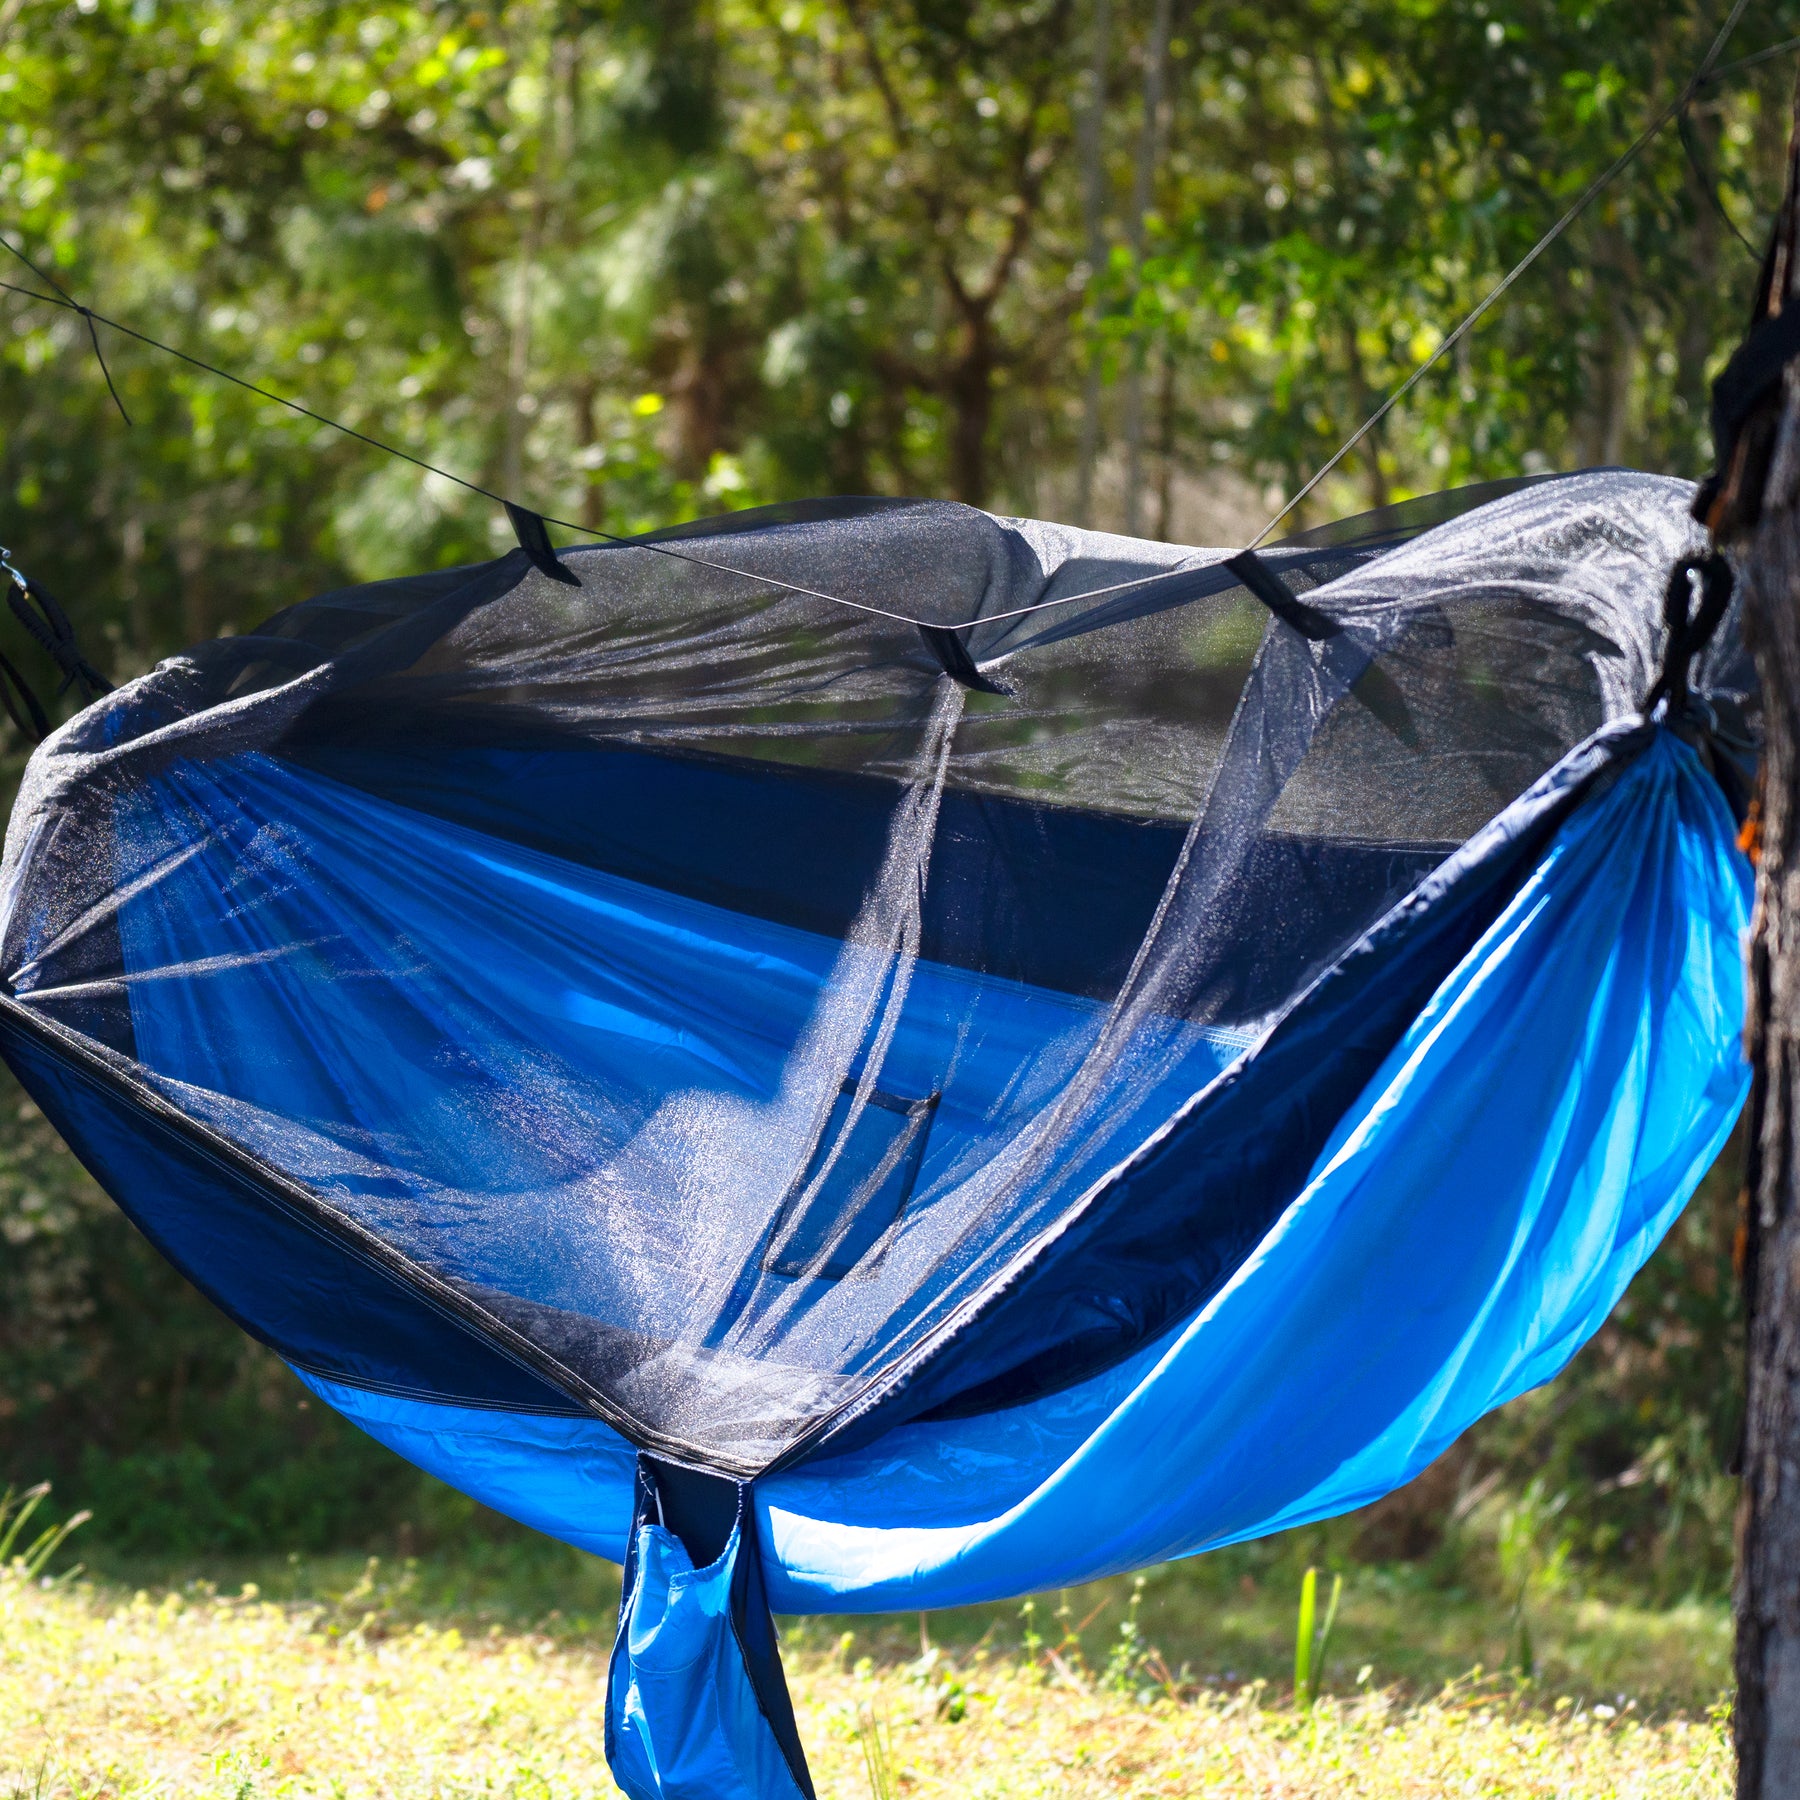 Bliss Hammocks 54-inch Wide Hammock in a Bag with mosquito net and tree straps hung outside between two trees.